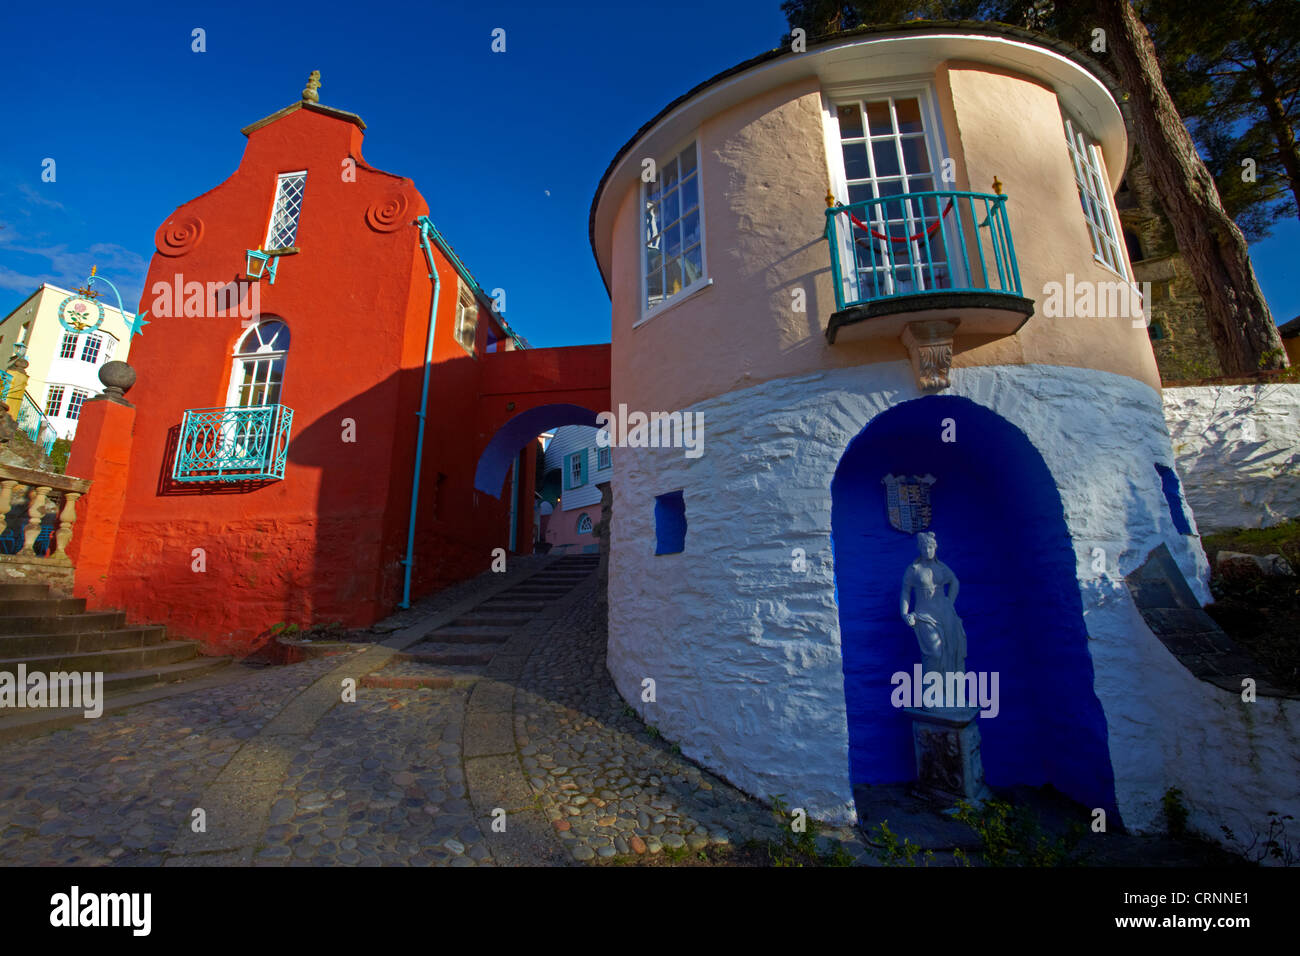 The Italianate resort village of Portmeirion in Gwynedd. Built by Clough Williams-Ellis from 1925 to 1975, the village is situat Stock Photo